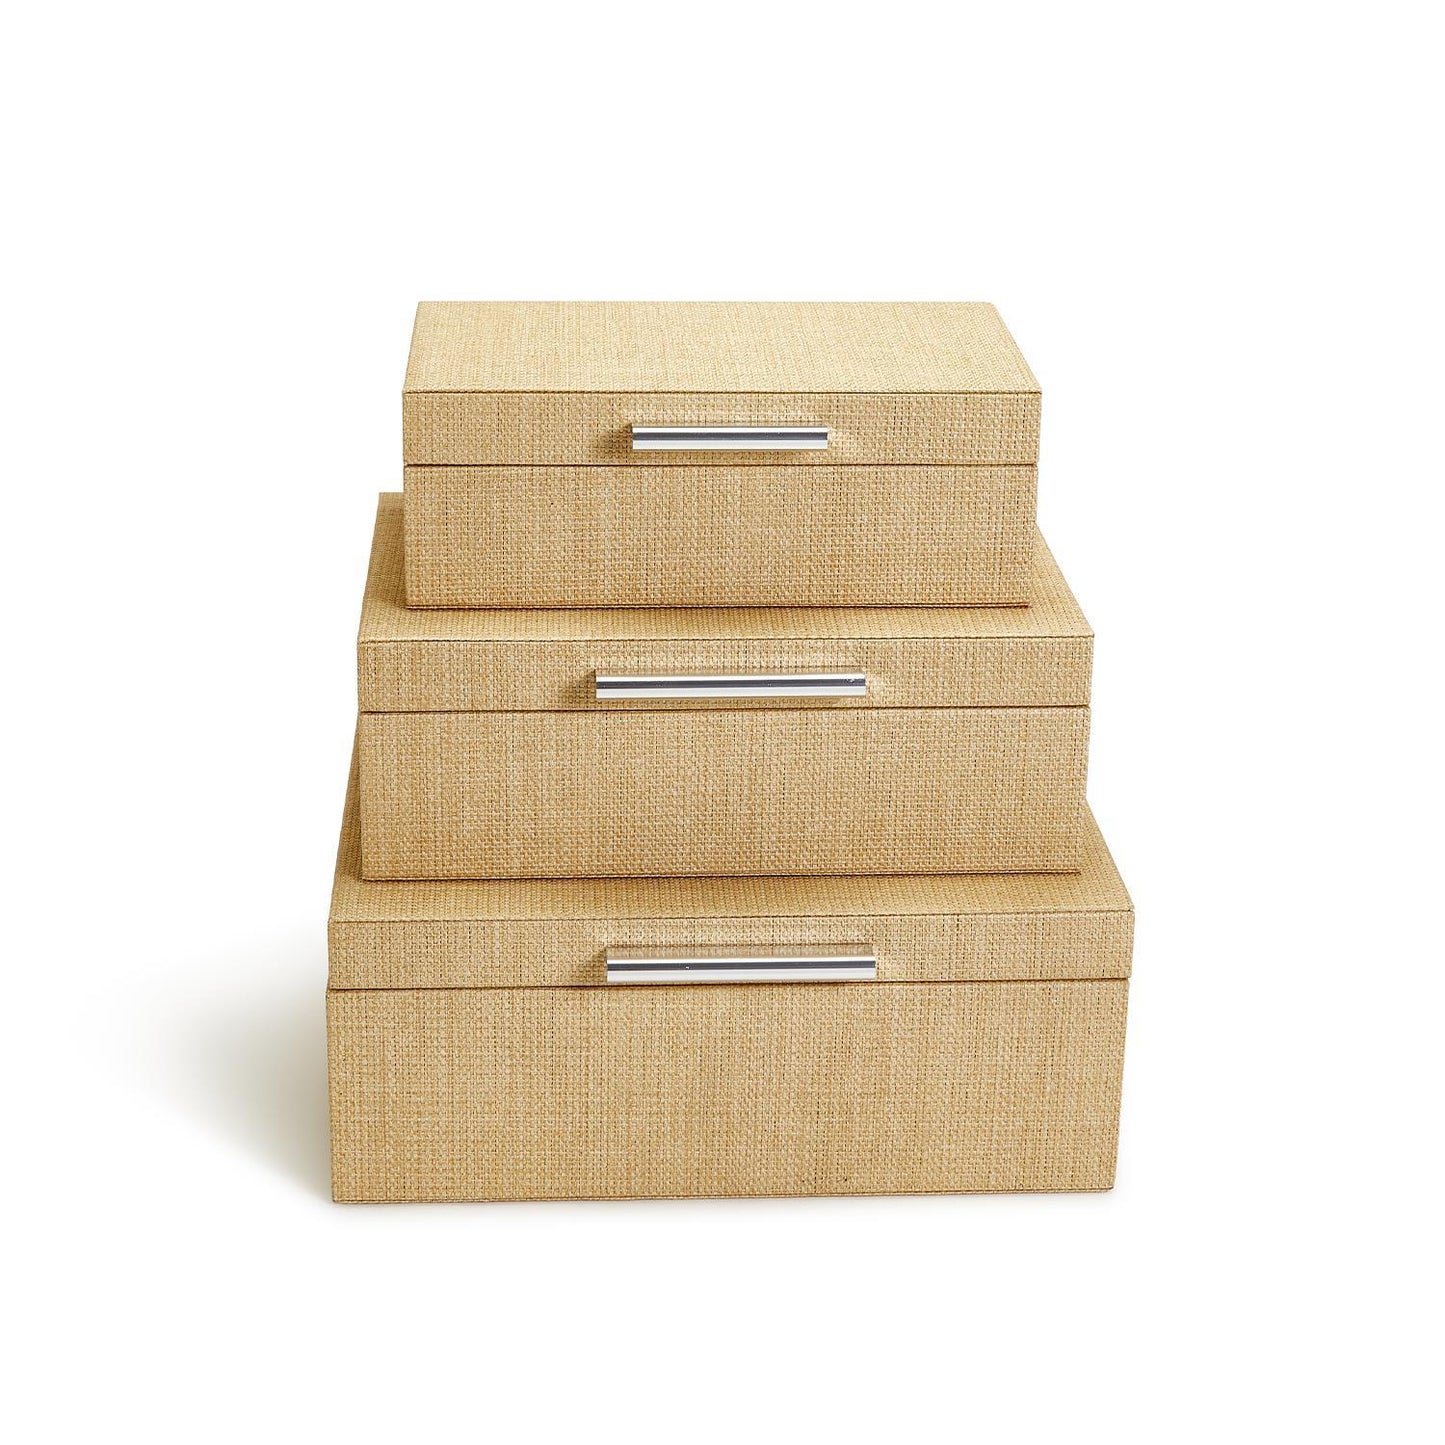 Set of 3 Hinged Boxes with Lining